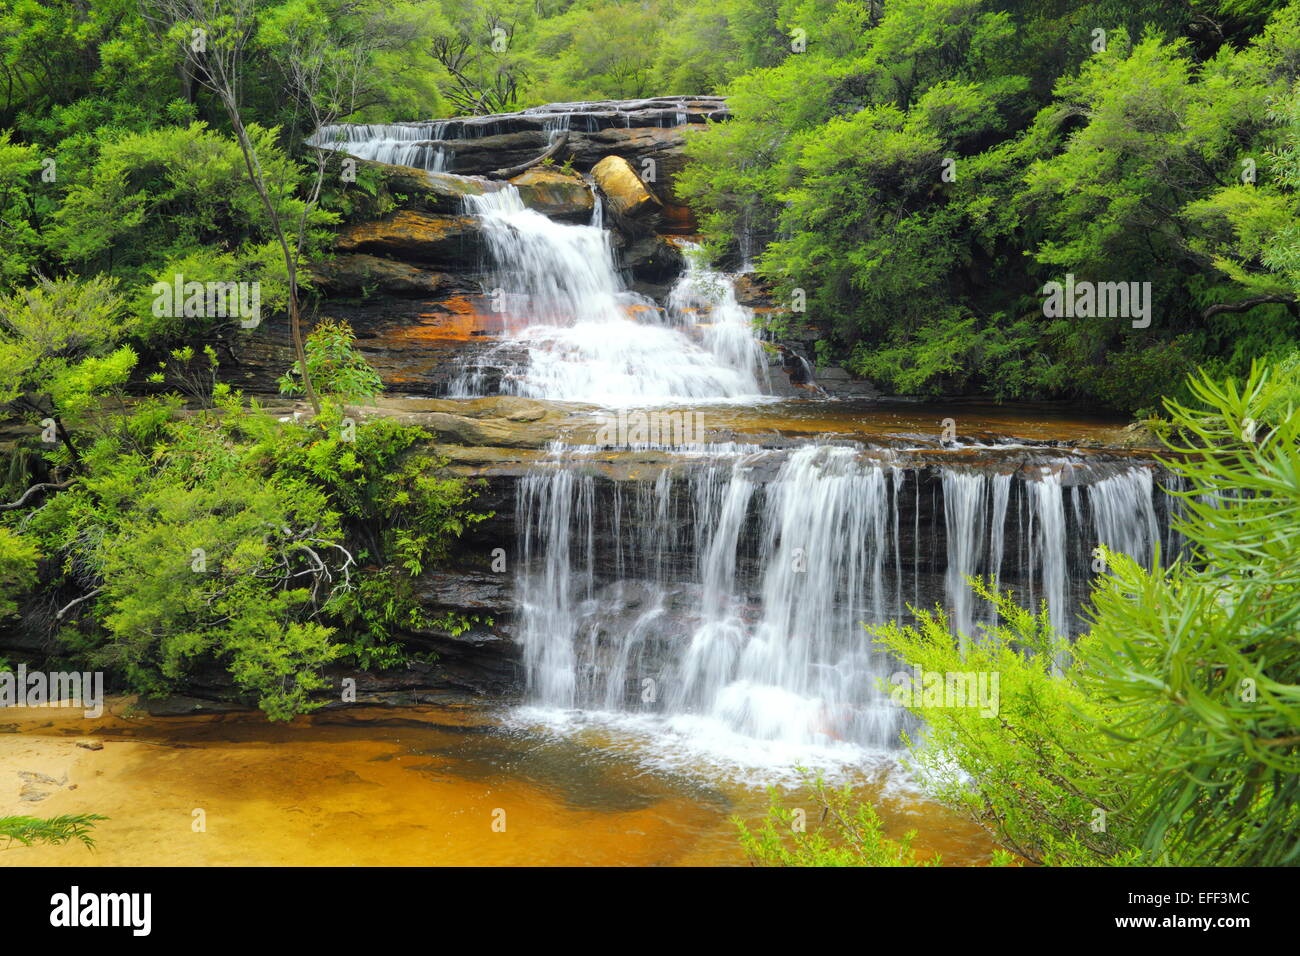 Waterfalls and rapids on Jamison Creek at Wentworth Falls in the Blue Mountains, NSW, Australia. Stock Photo